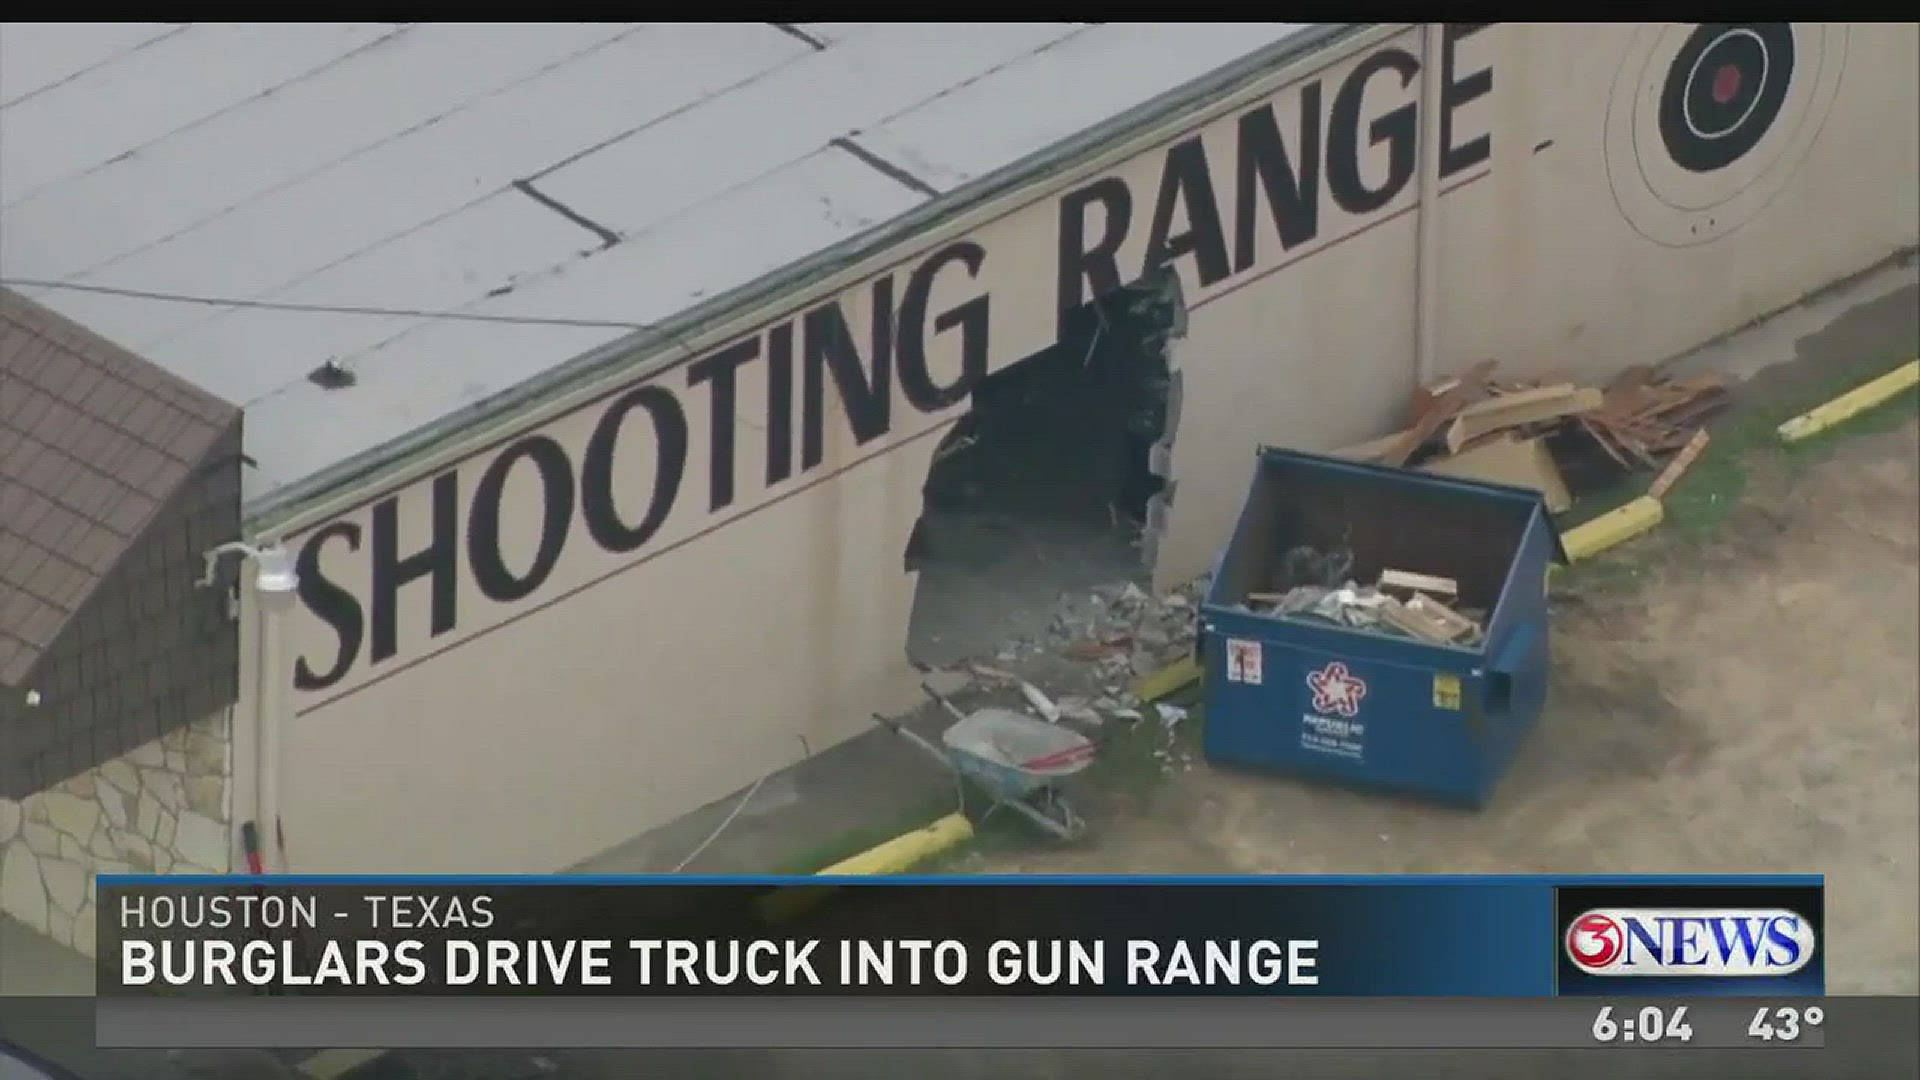 South Houston police say burglars took rifles and pistols from a gun range in a smash-and-grab early Thursday.